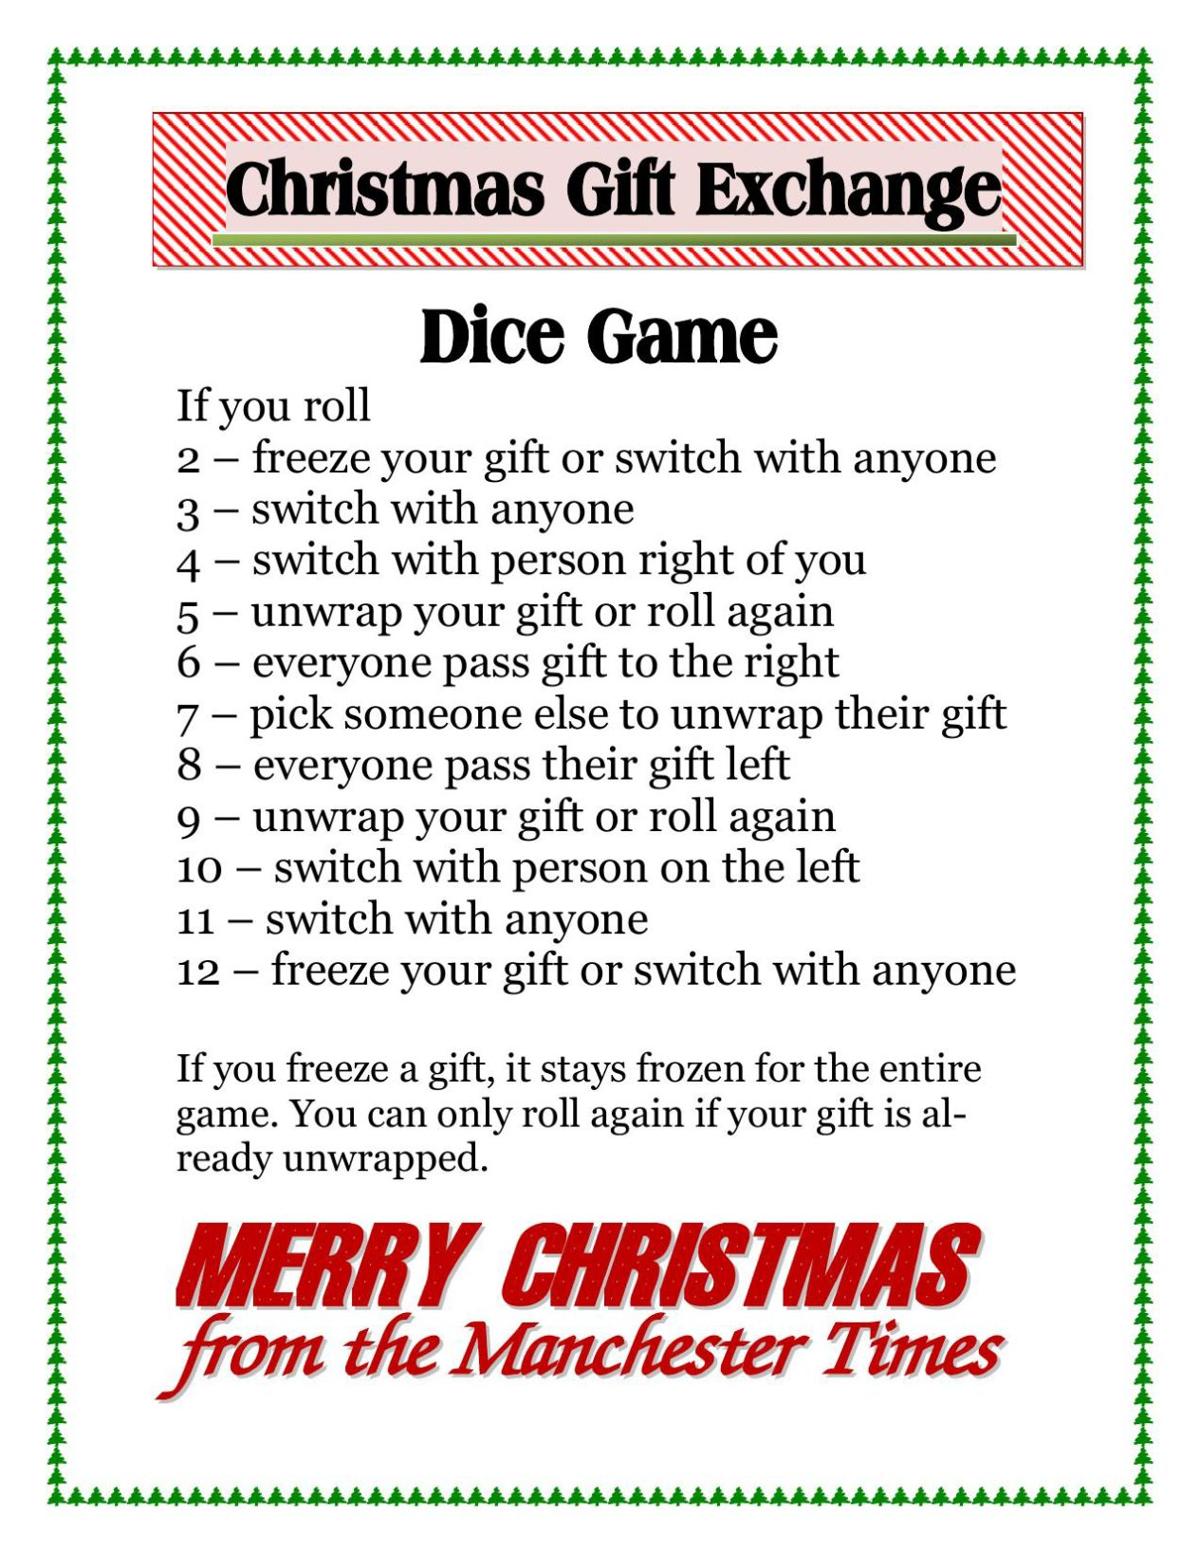 spice-up-holiday-gift-giving-with-new-gift-exchange-games-education